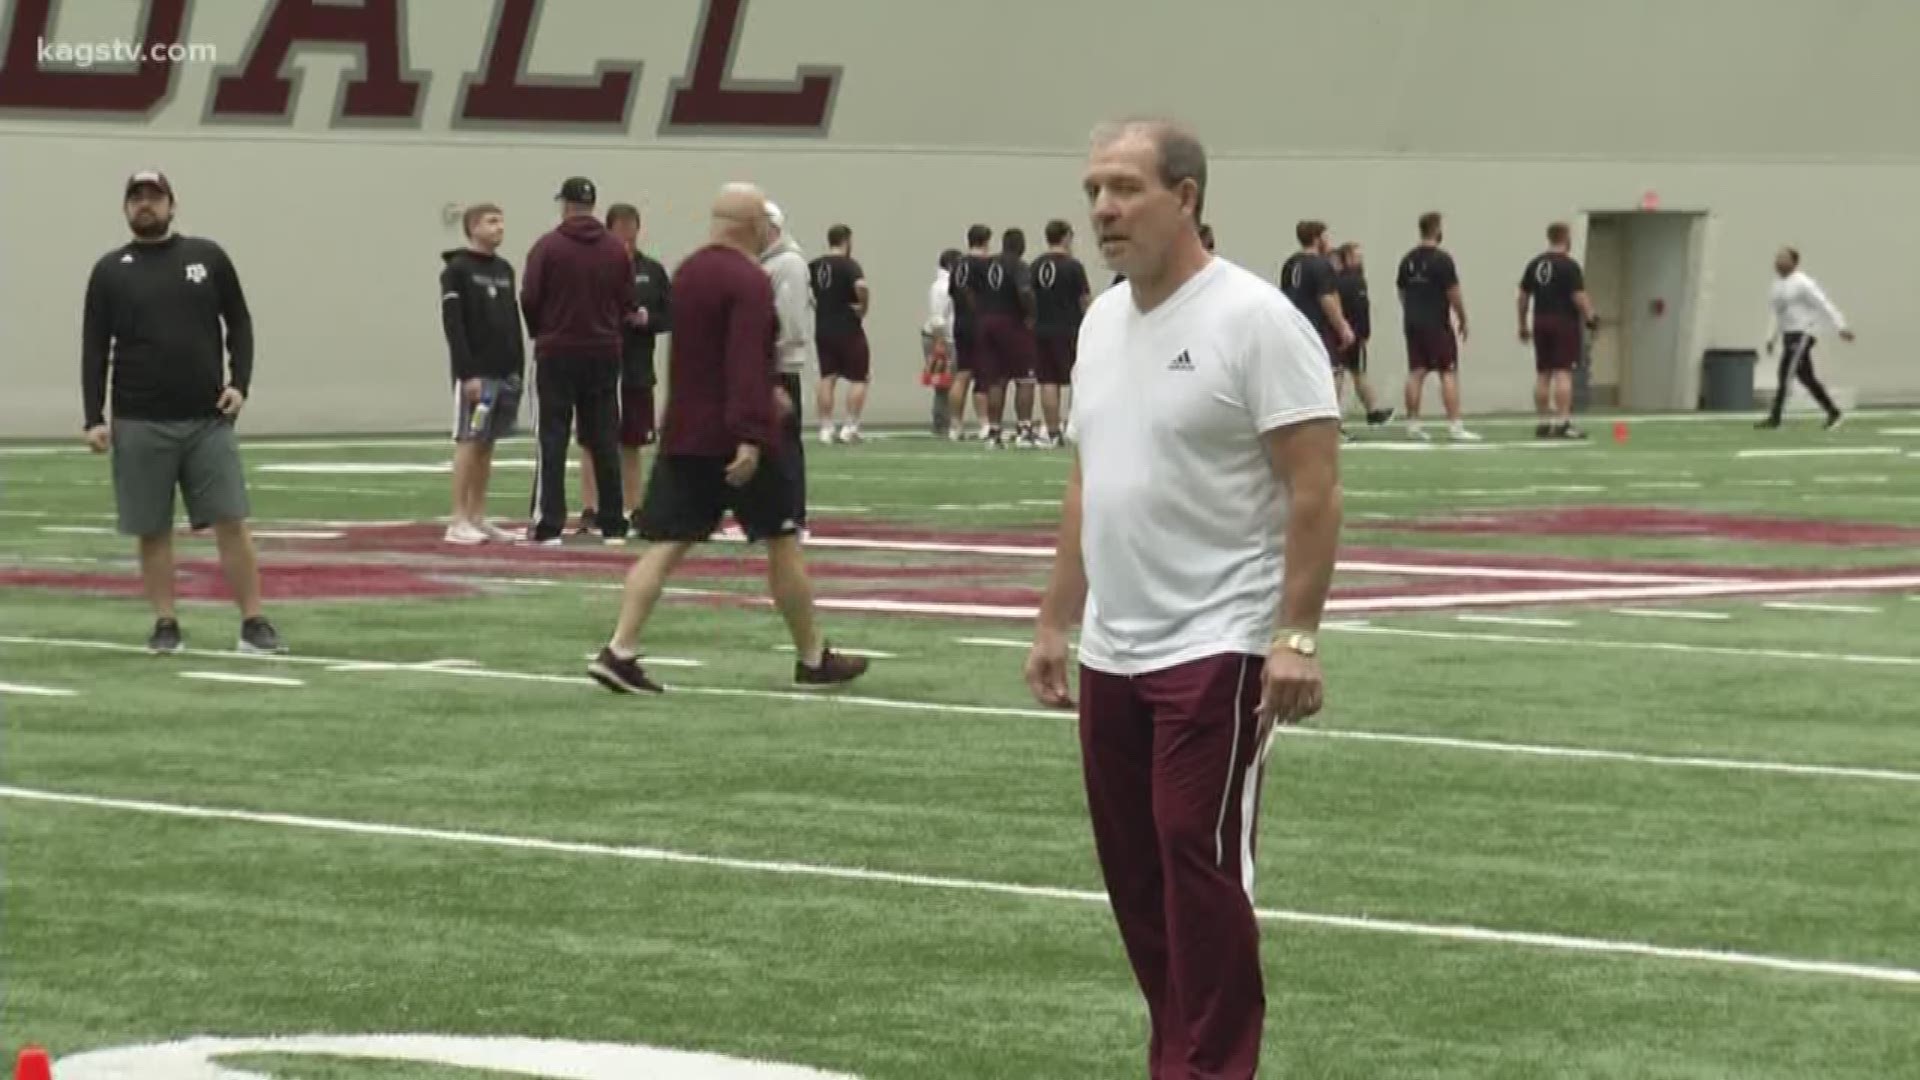 On Thursday afternoon, the media was invited to watch the Texass A&M football team go through fourth quarter conditioning drills.